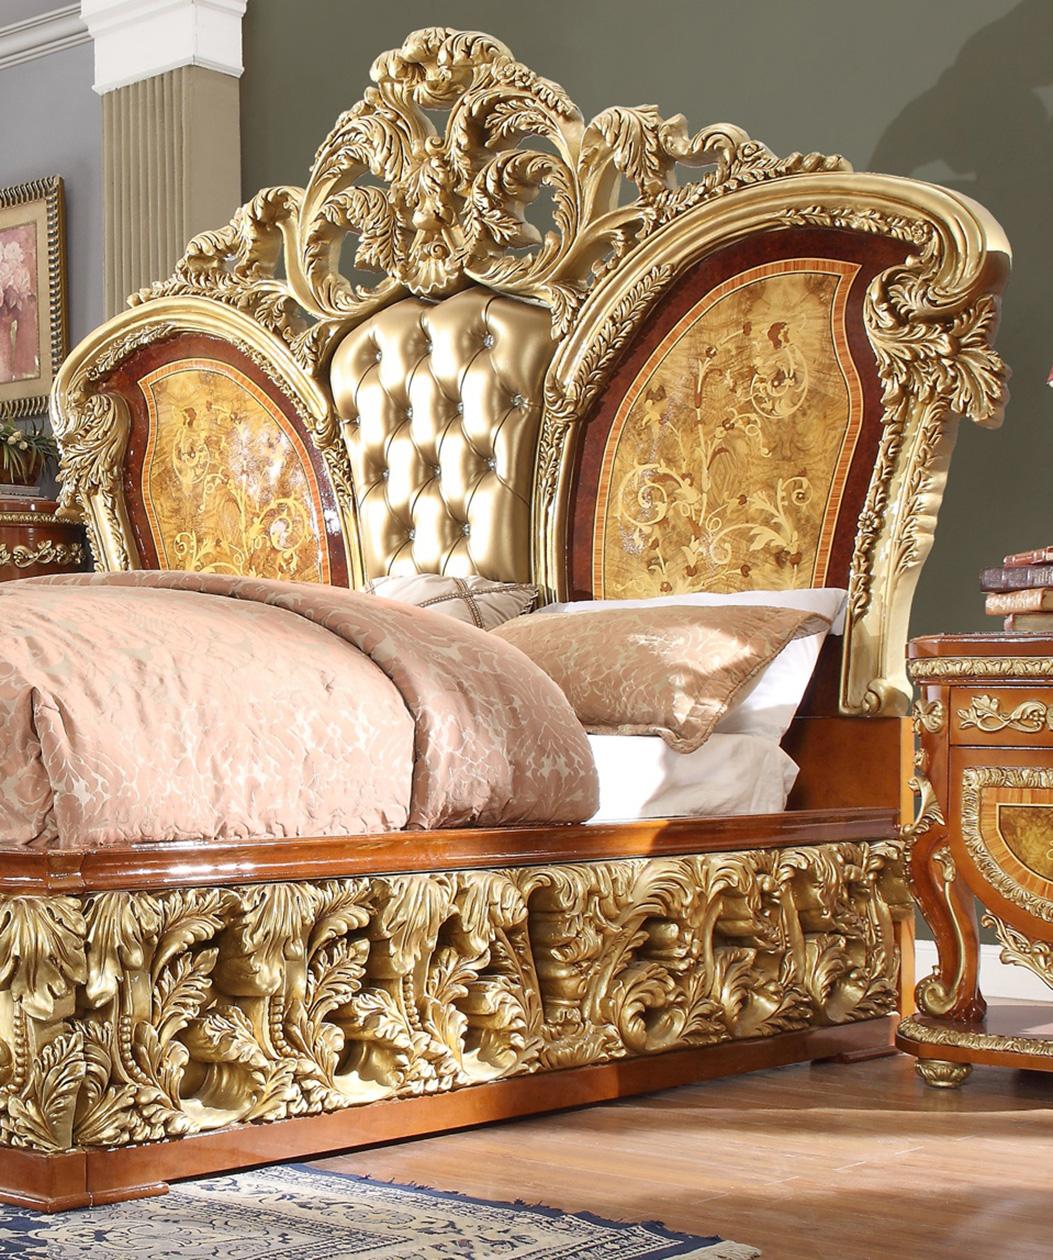 

    
Luxury CAL King Bed Tufted Leather Gold Curved Wood Homey Design HD-8024
